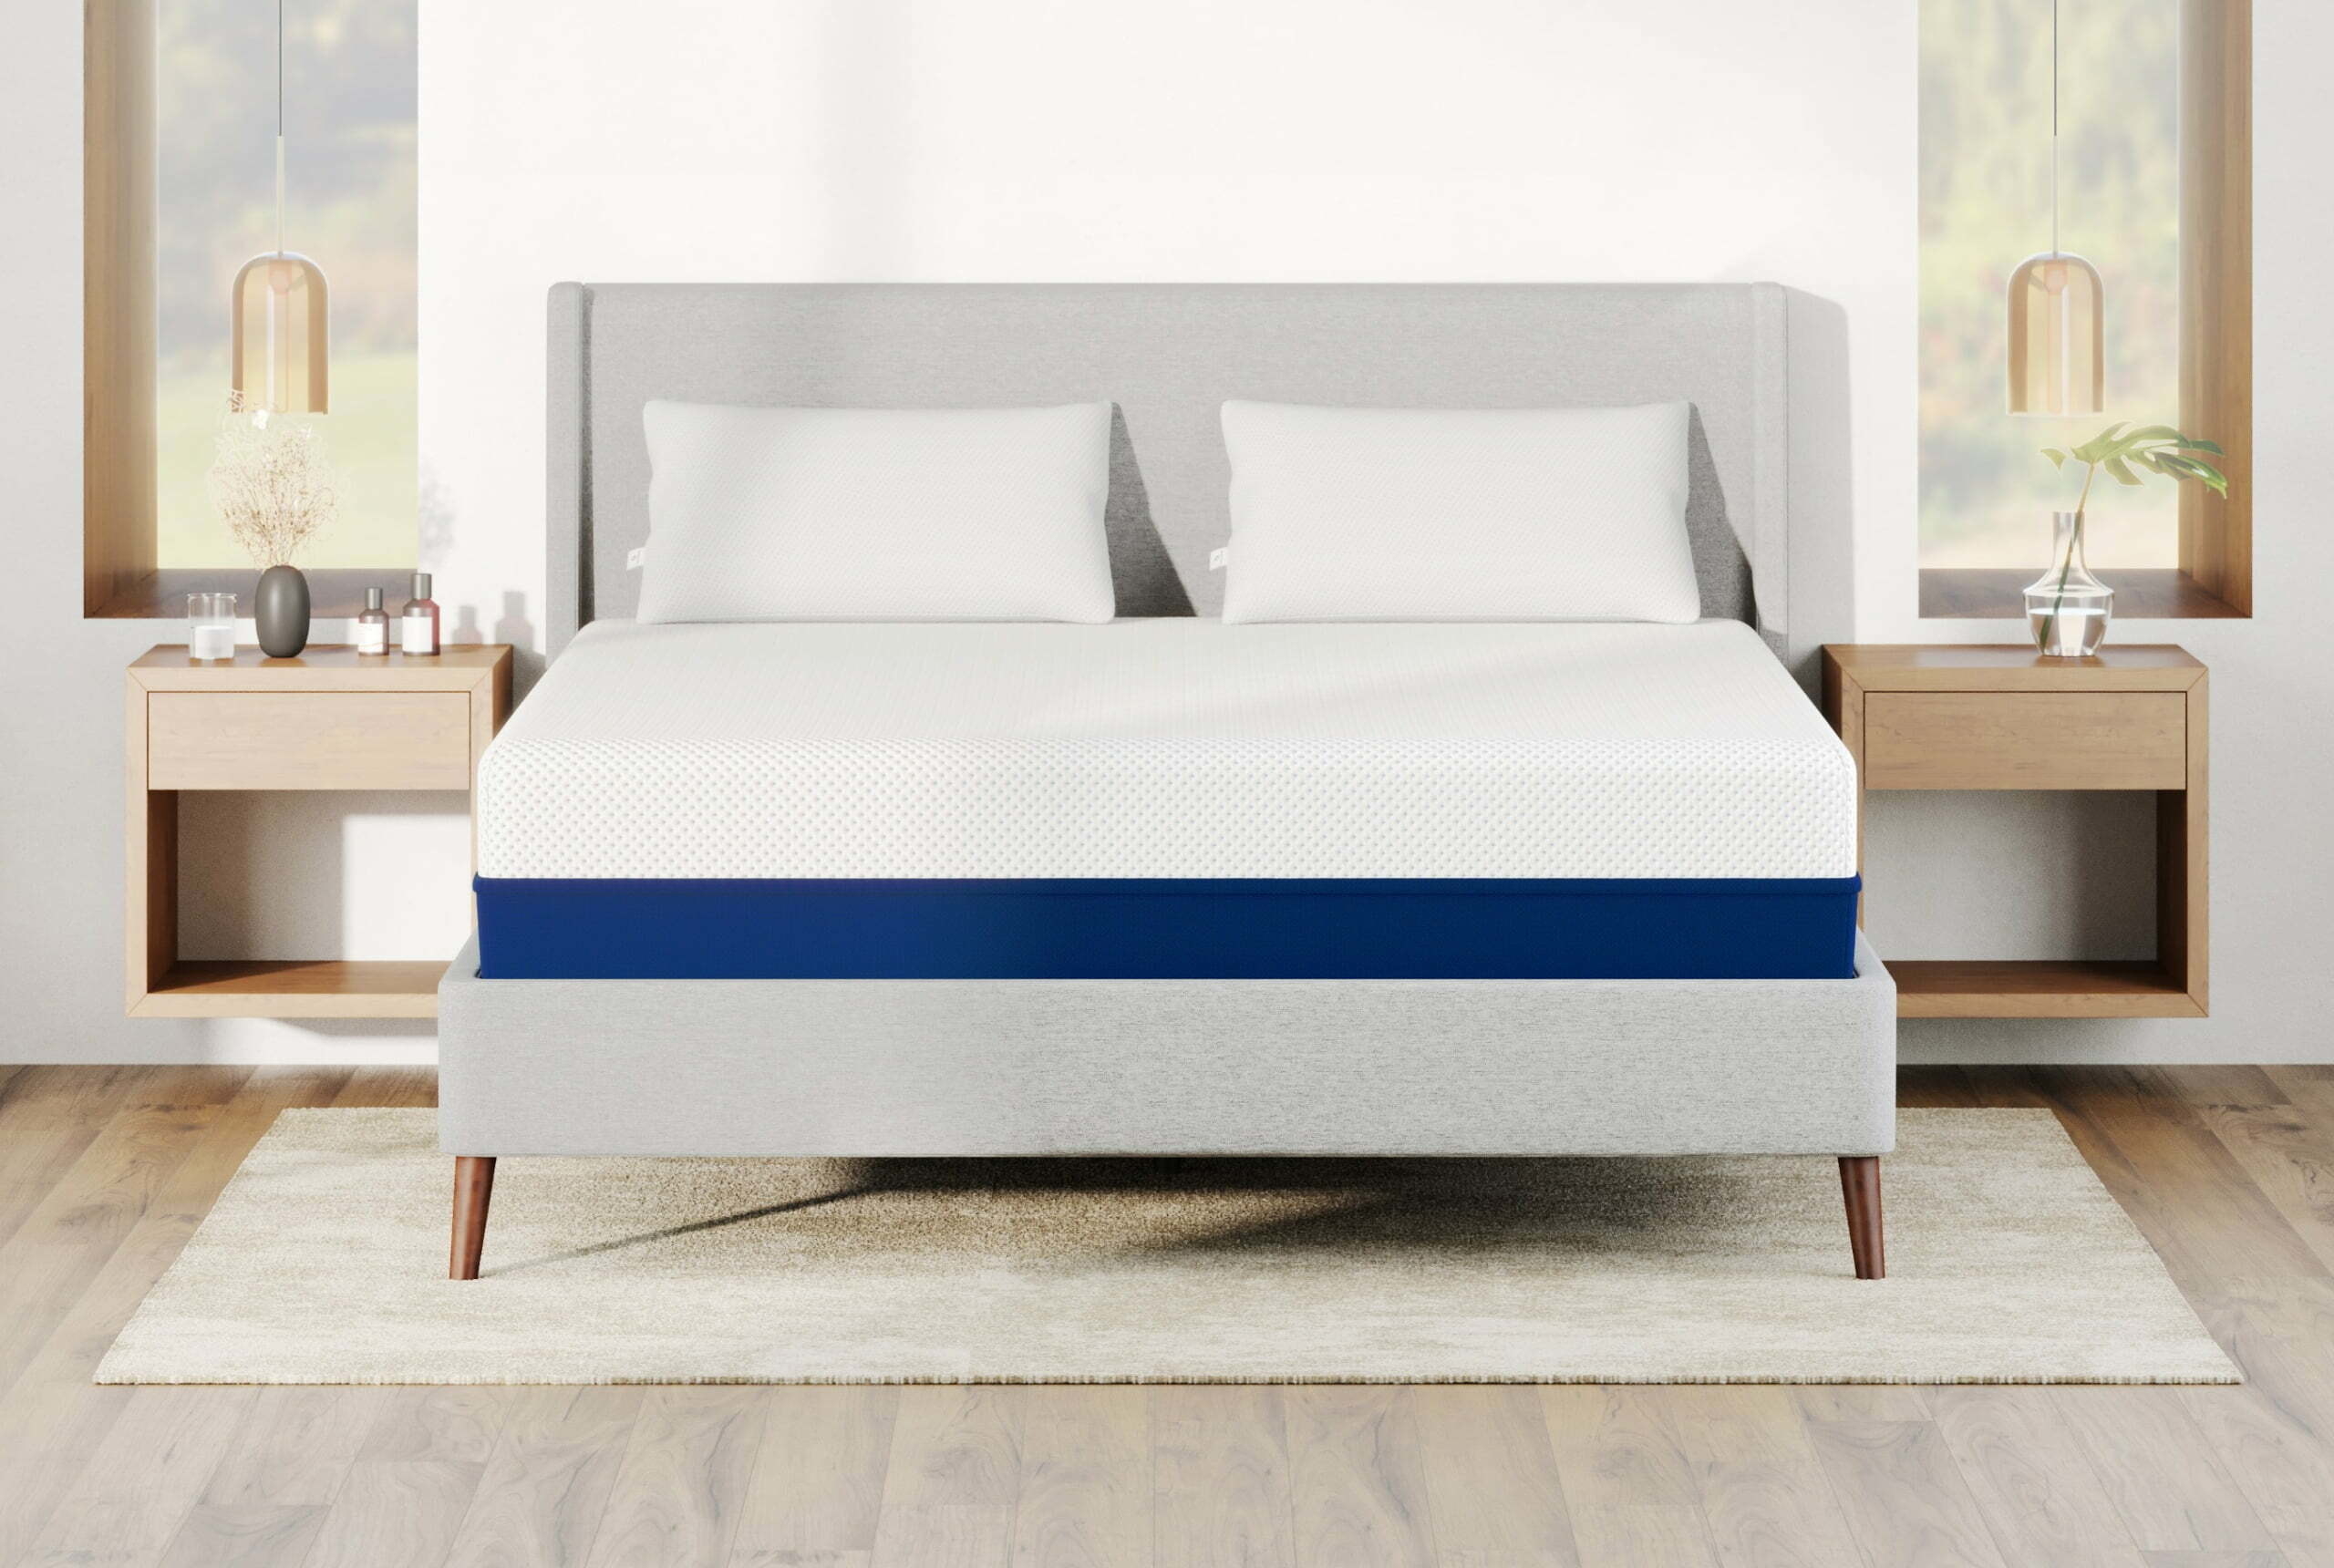 A mattress is shown on a bed